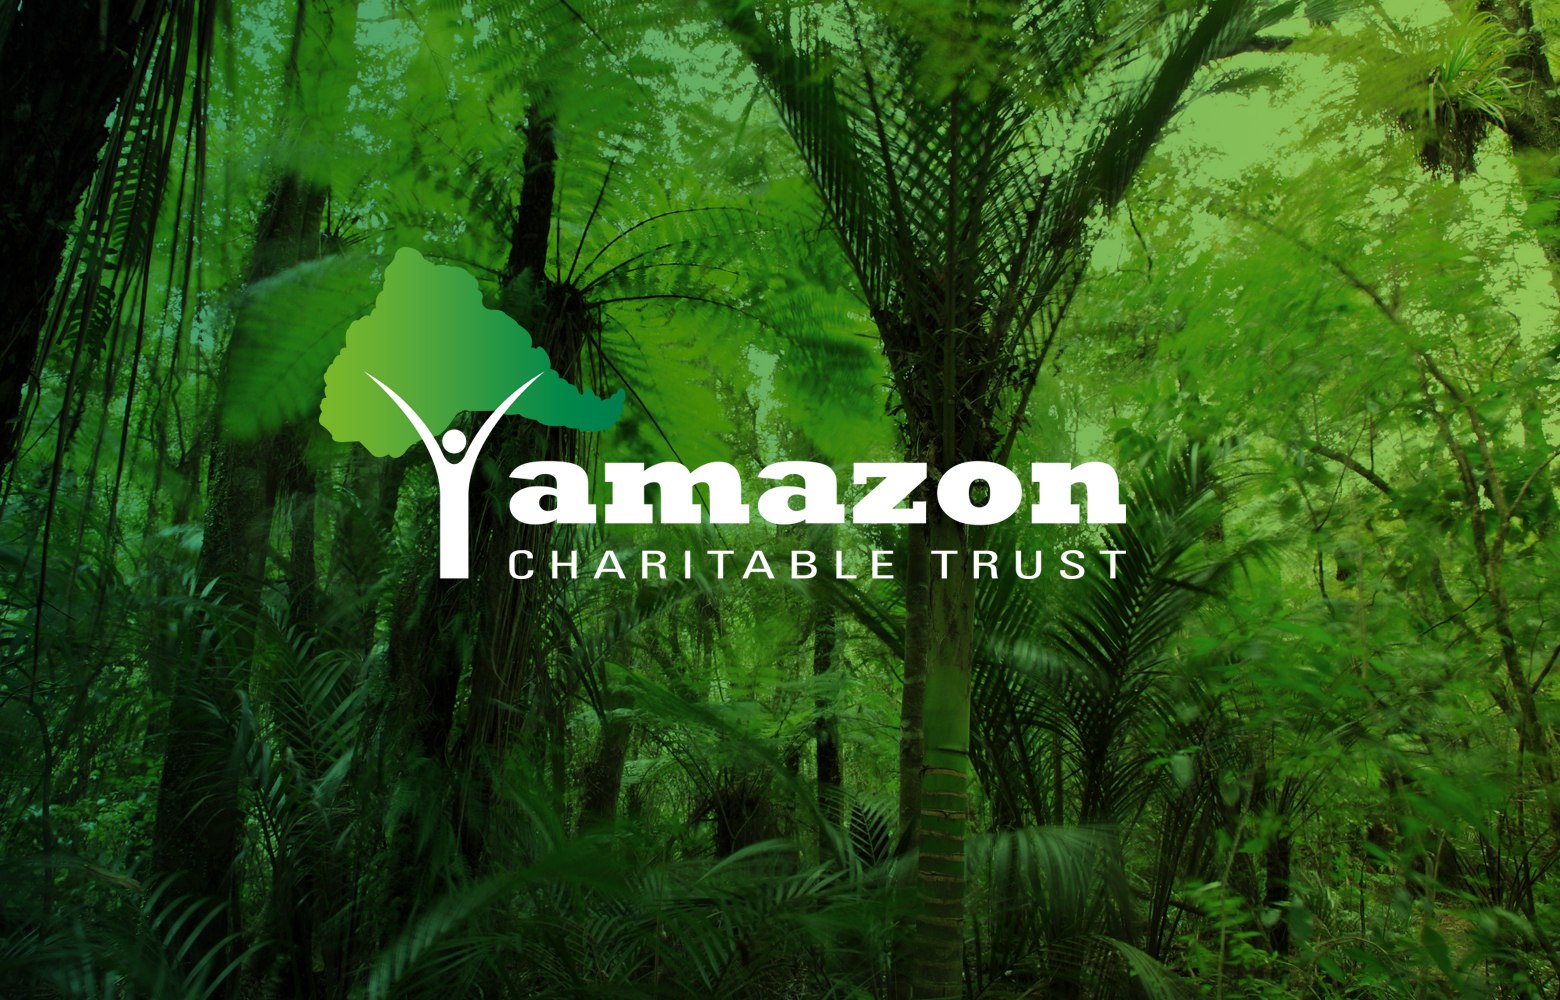 Proposed Amazon Science Research and Corporate Environmental Village